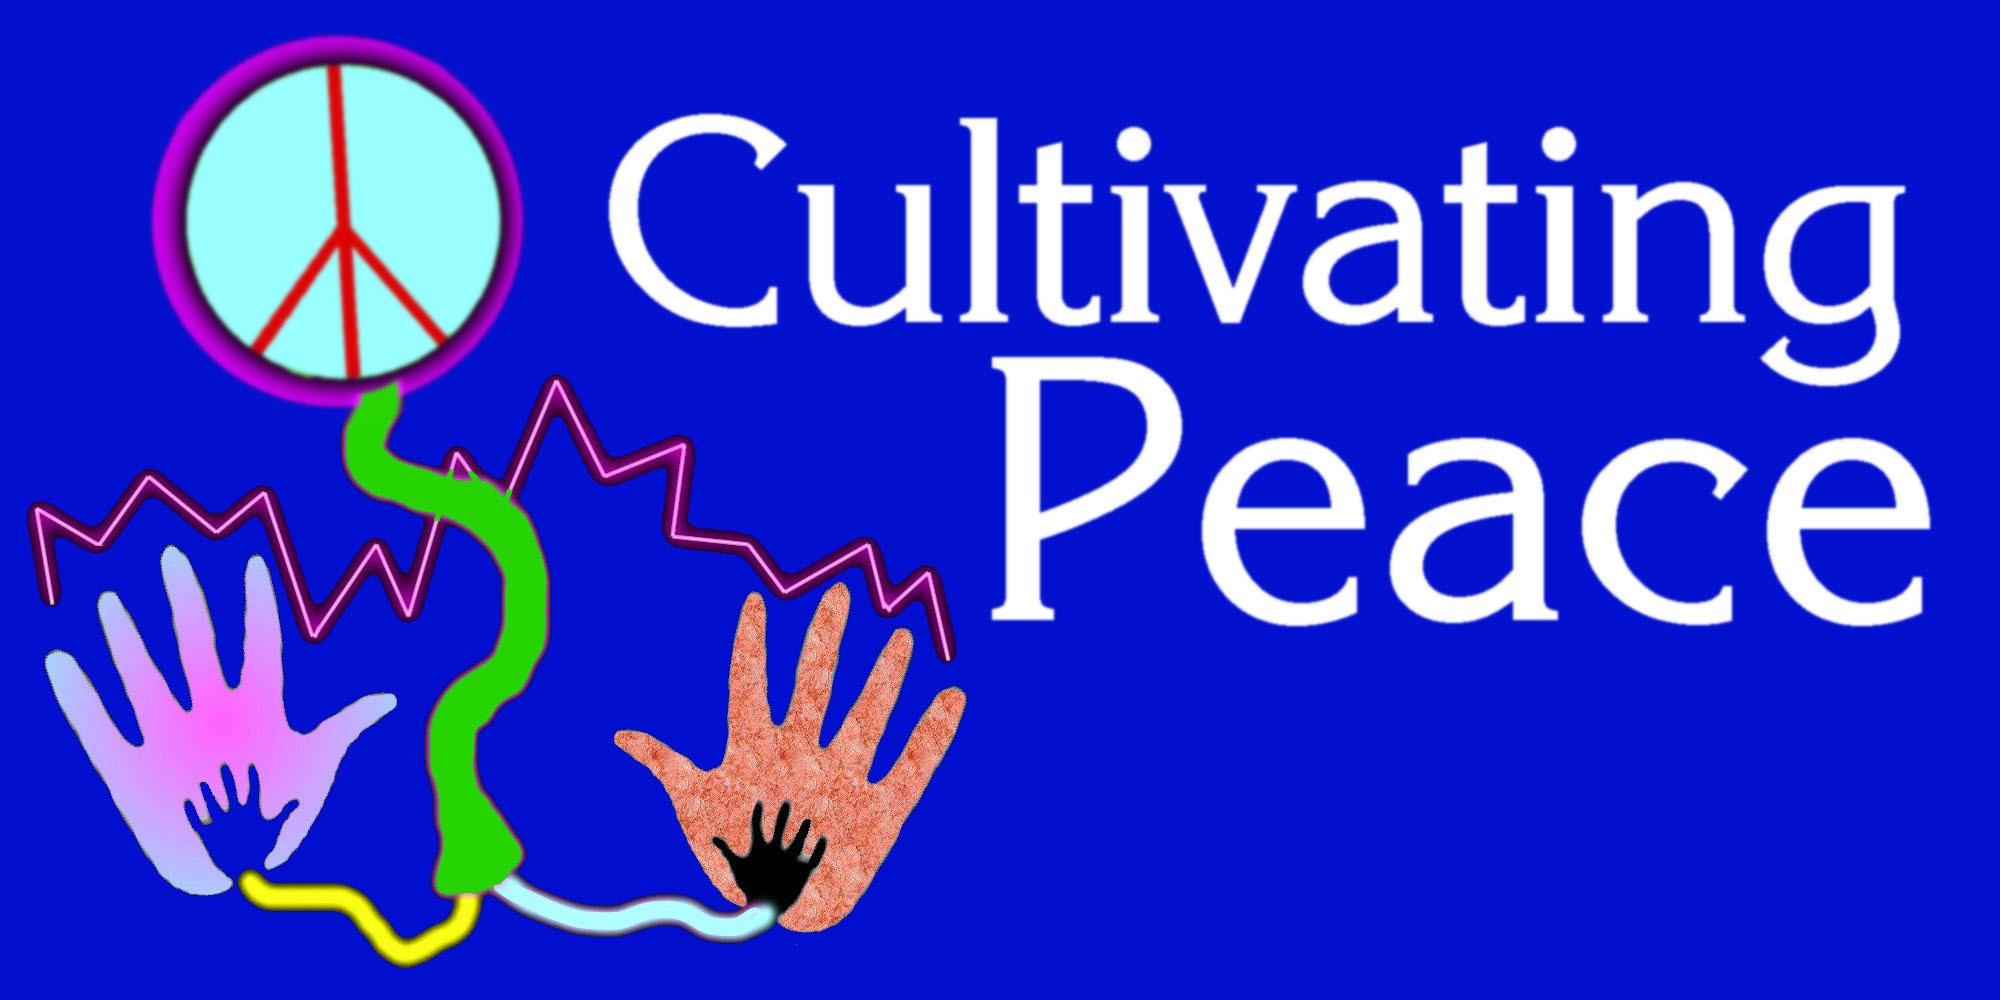 Cultivating Peace...the logo is multigenerational and includes the symbol for nuclear disarmament (circle of peace) in semiphore growing as it's cultivated.